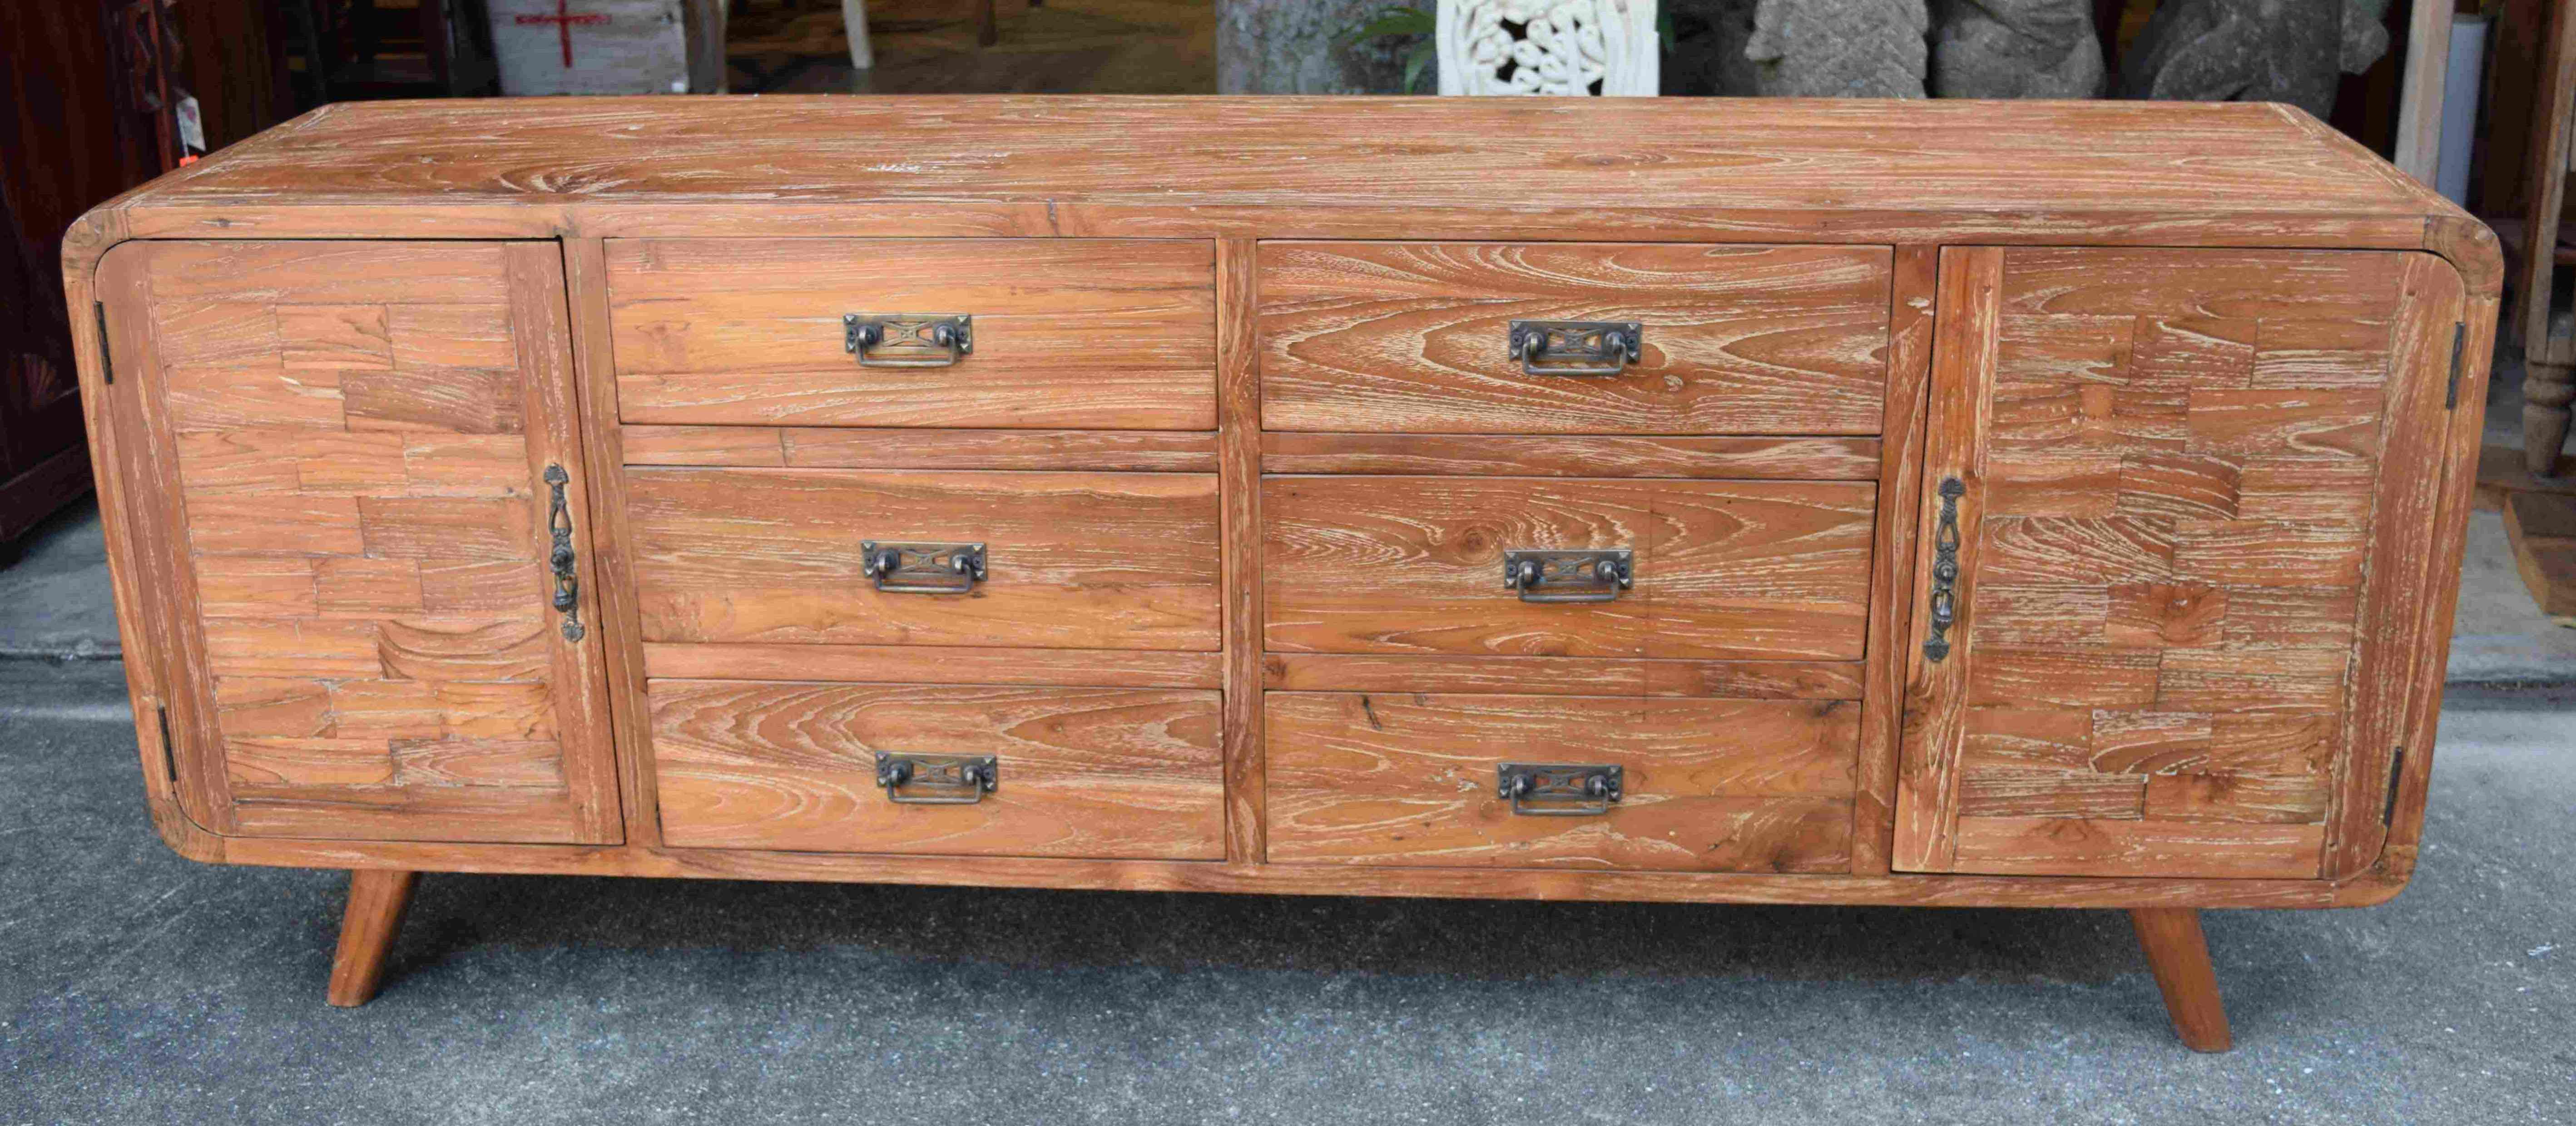 Balinese Reclaimed Teak Console Columbus And Cook